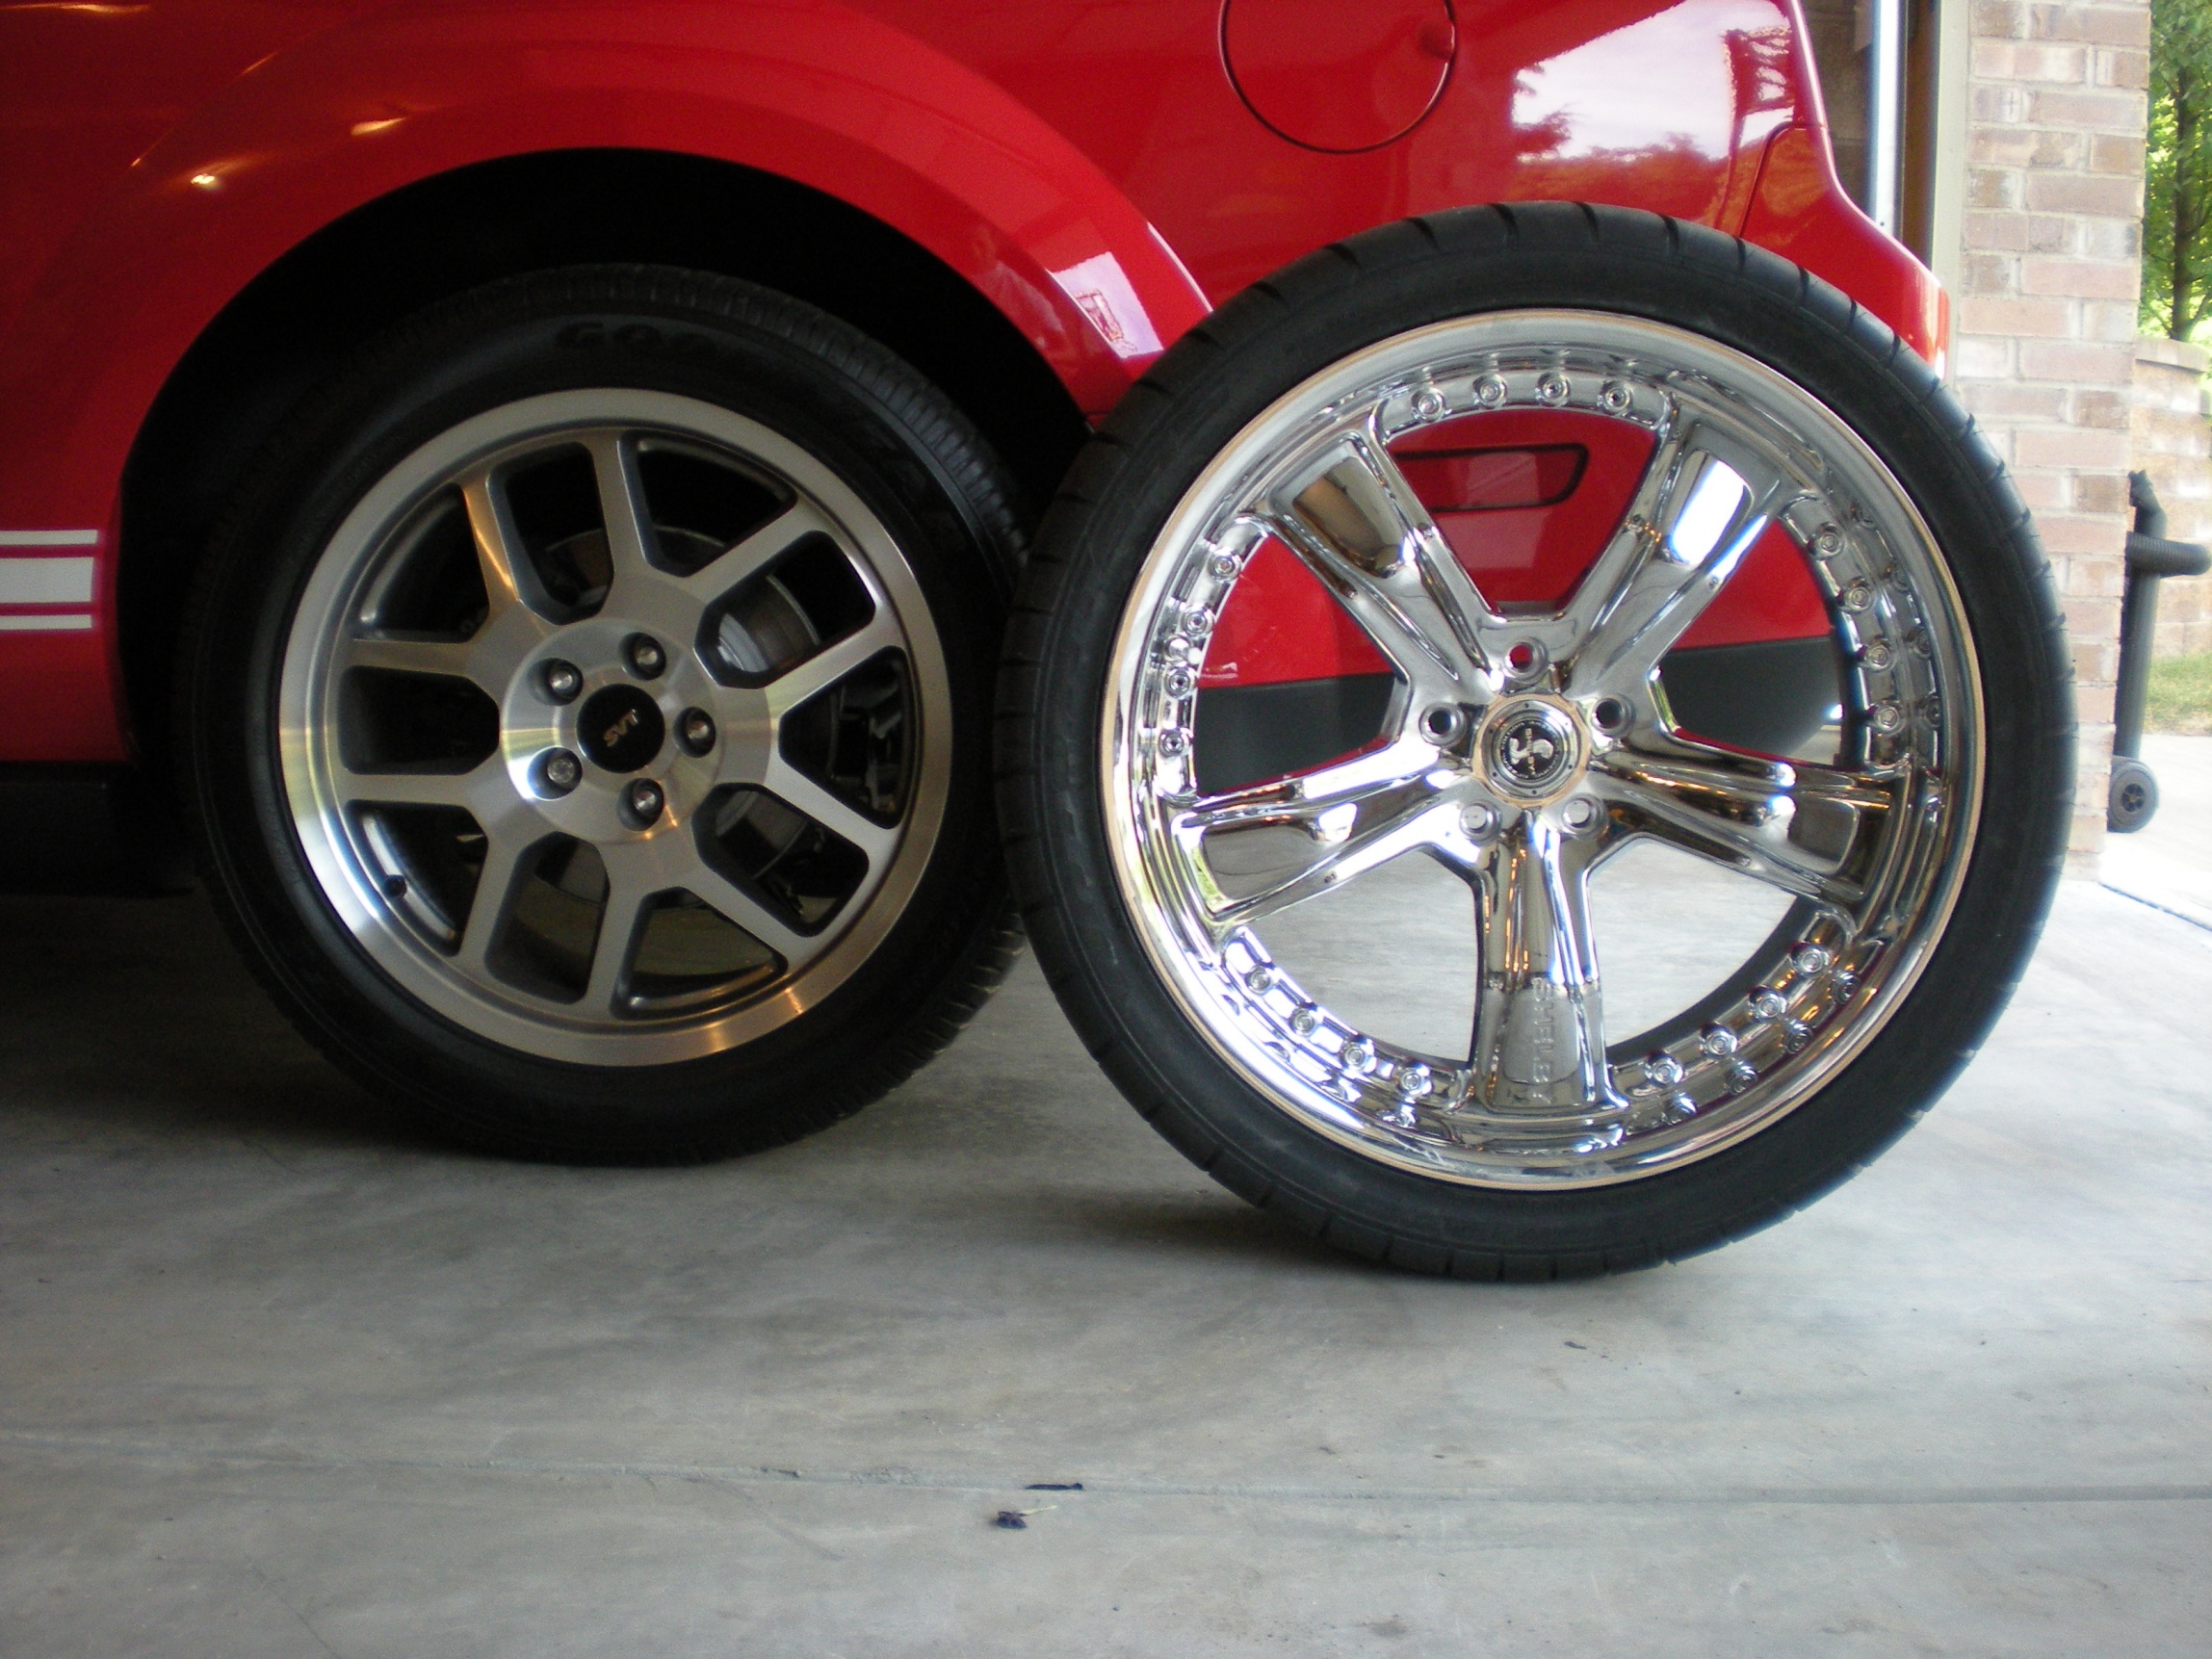 Pix of any 20" rims? - The Mustang Source - Ford Mustang Forums 17 Inch Wheels Vs 20 Inch Wheels